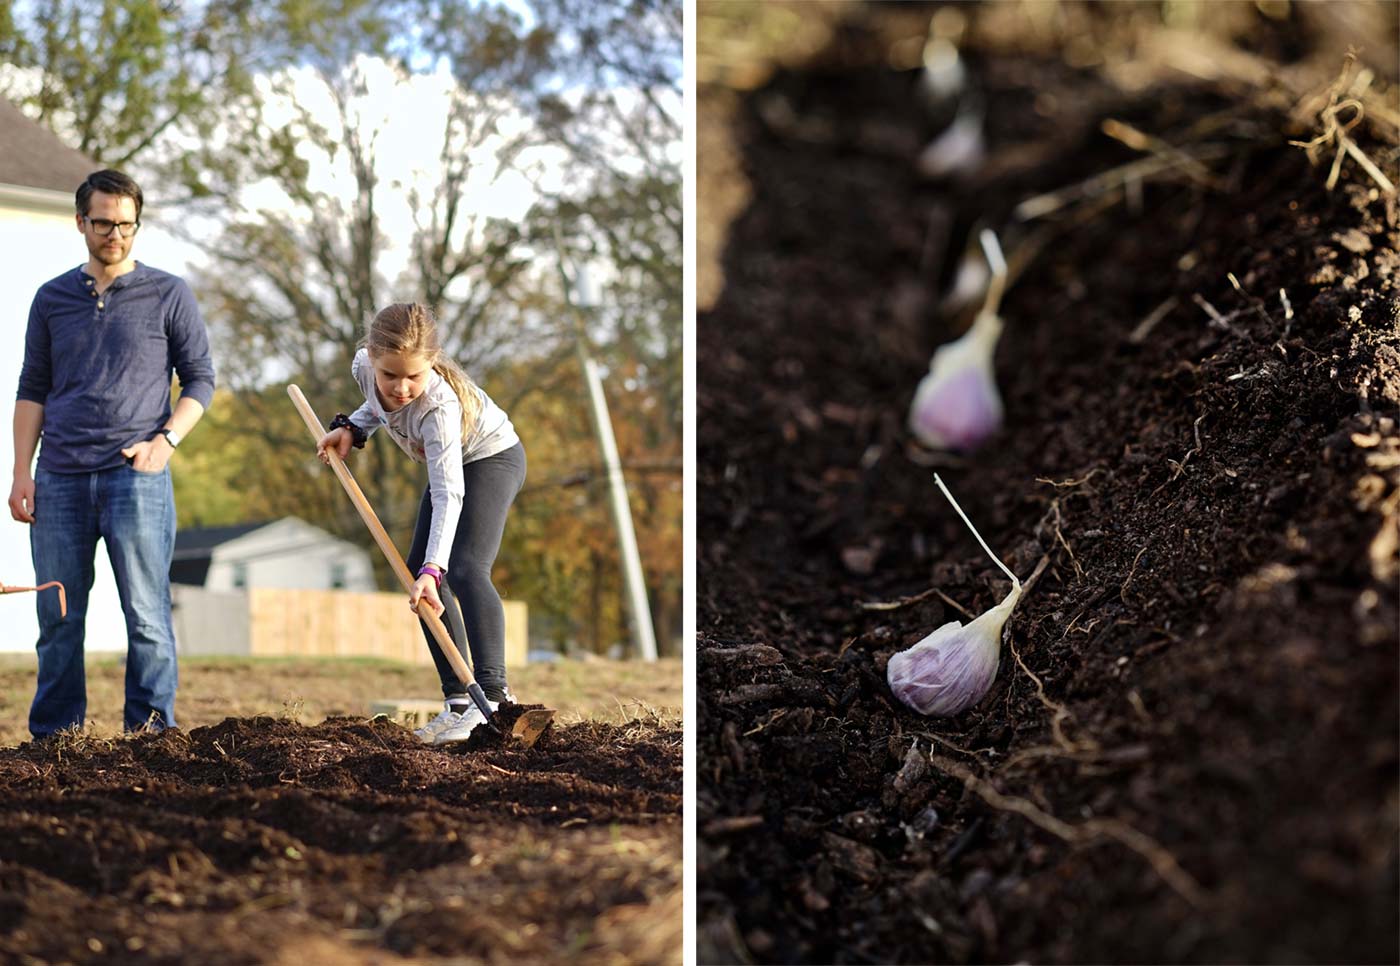 Left: Annabelle helps with the planting. Right: Garlic cloves are planted in November for harvest in the summer.